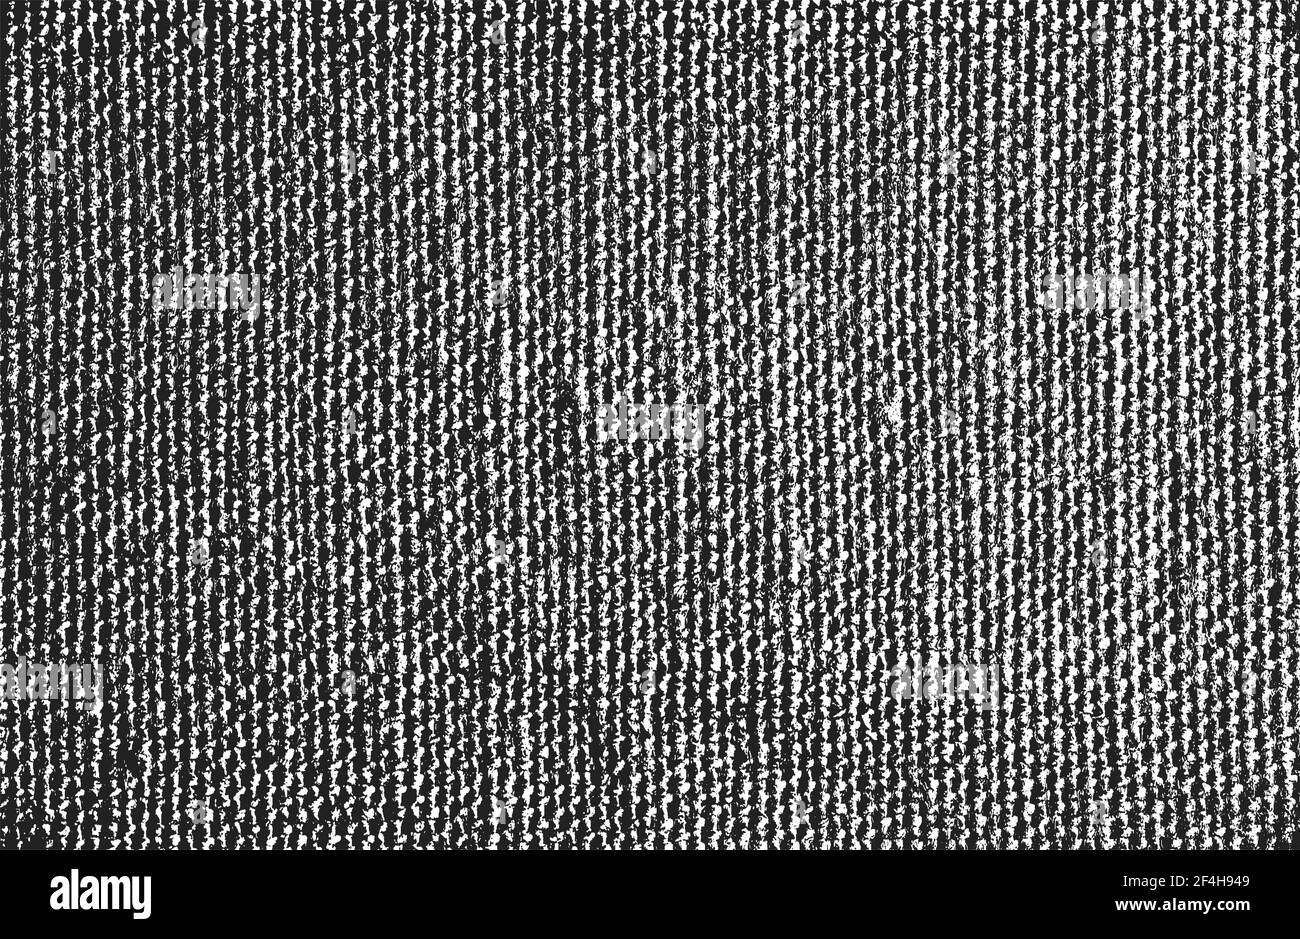 Distressed overlay texture of weaving fabric. grunge background. abstract halftone vector illustration Stock Vector